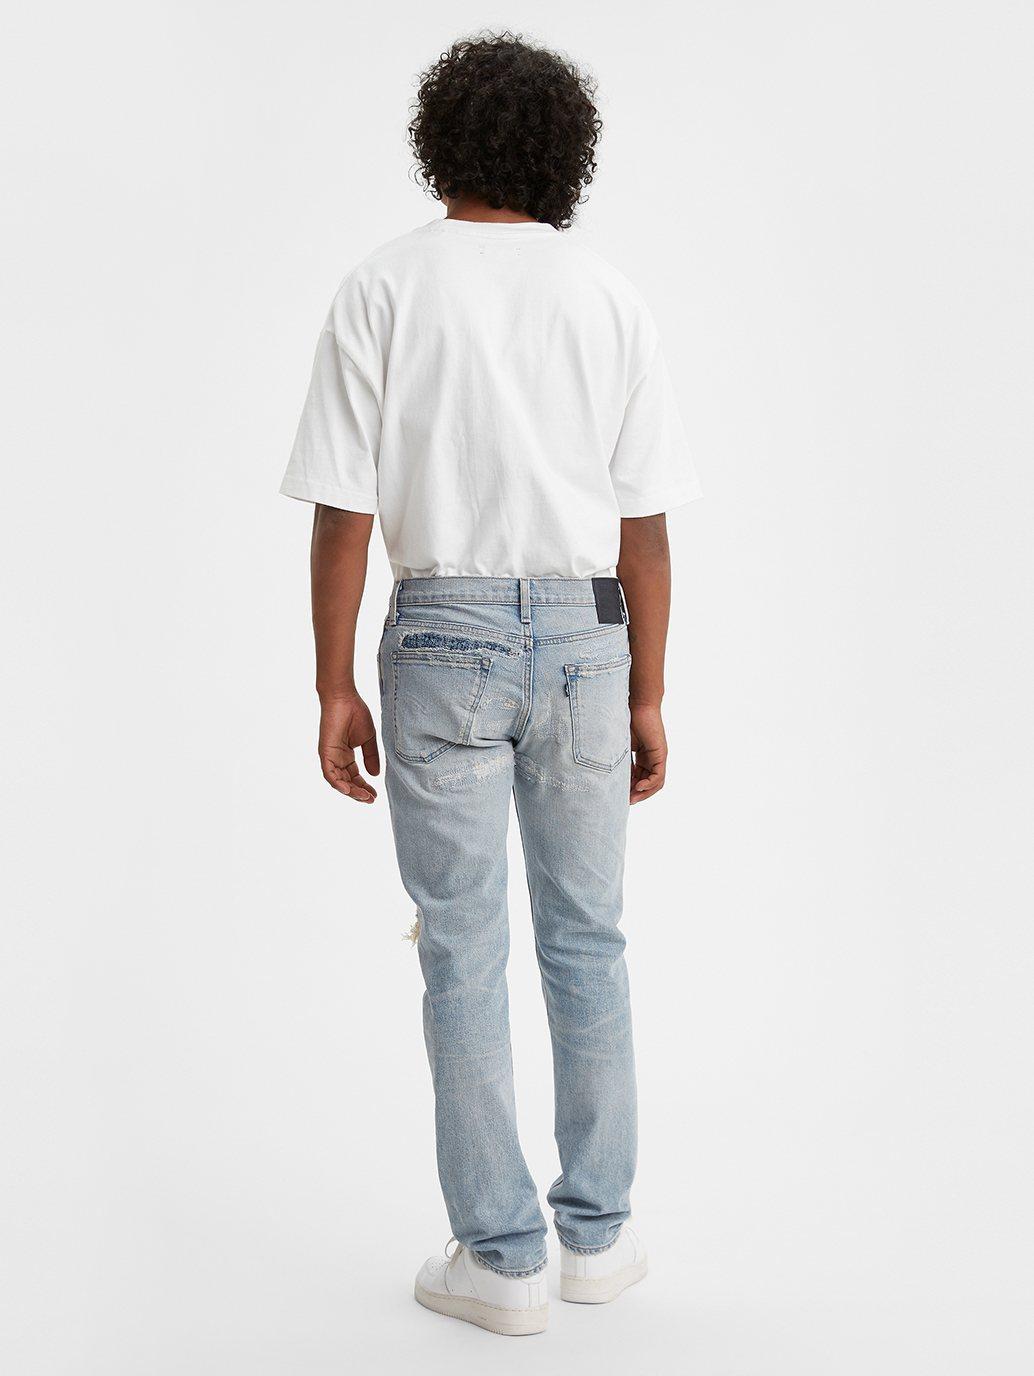 Buy Levi's® Made In Japan 511™ Slim Fit Jeans | Levi’s® Official Online ...